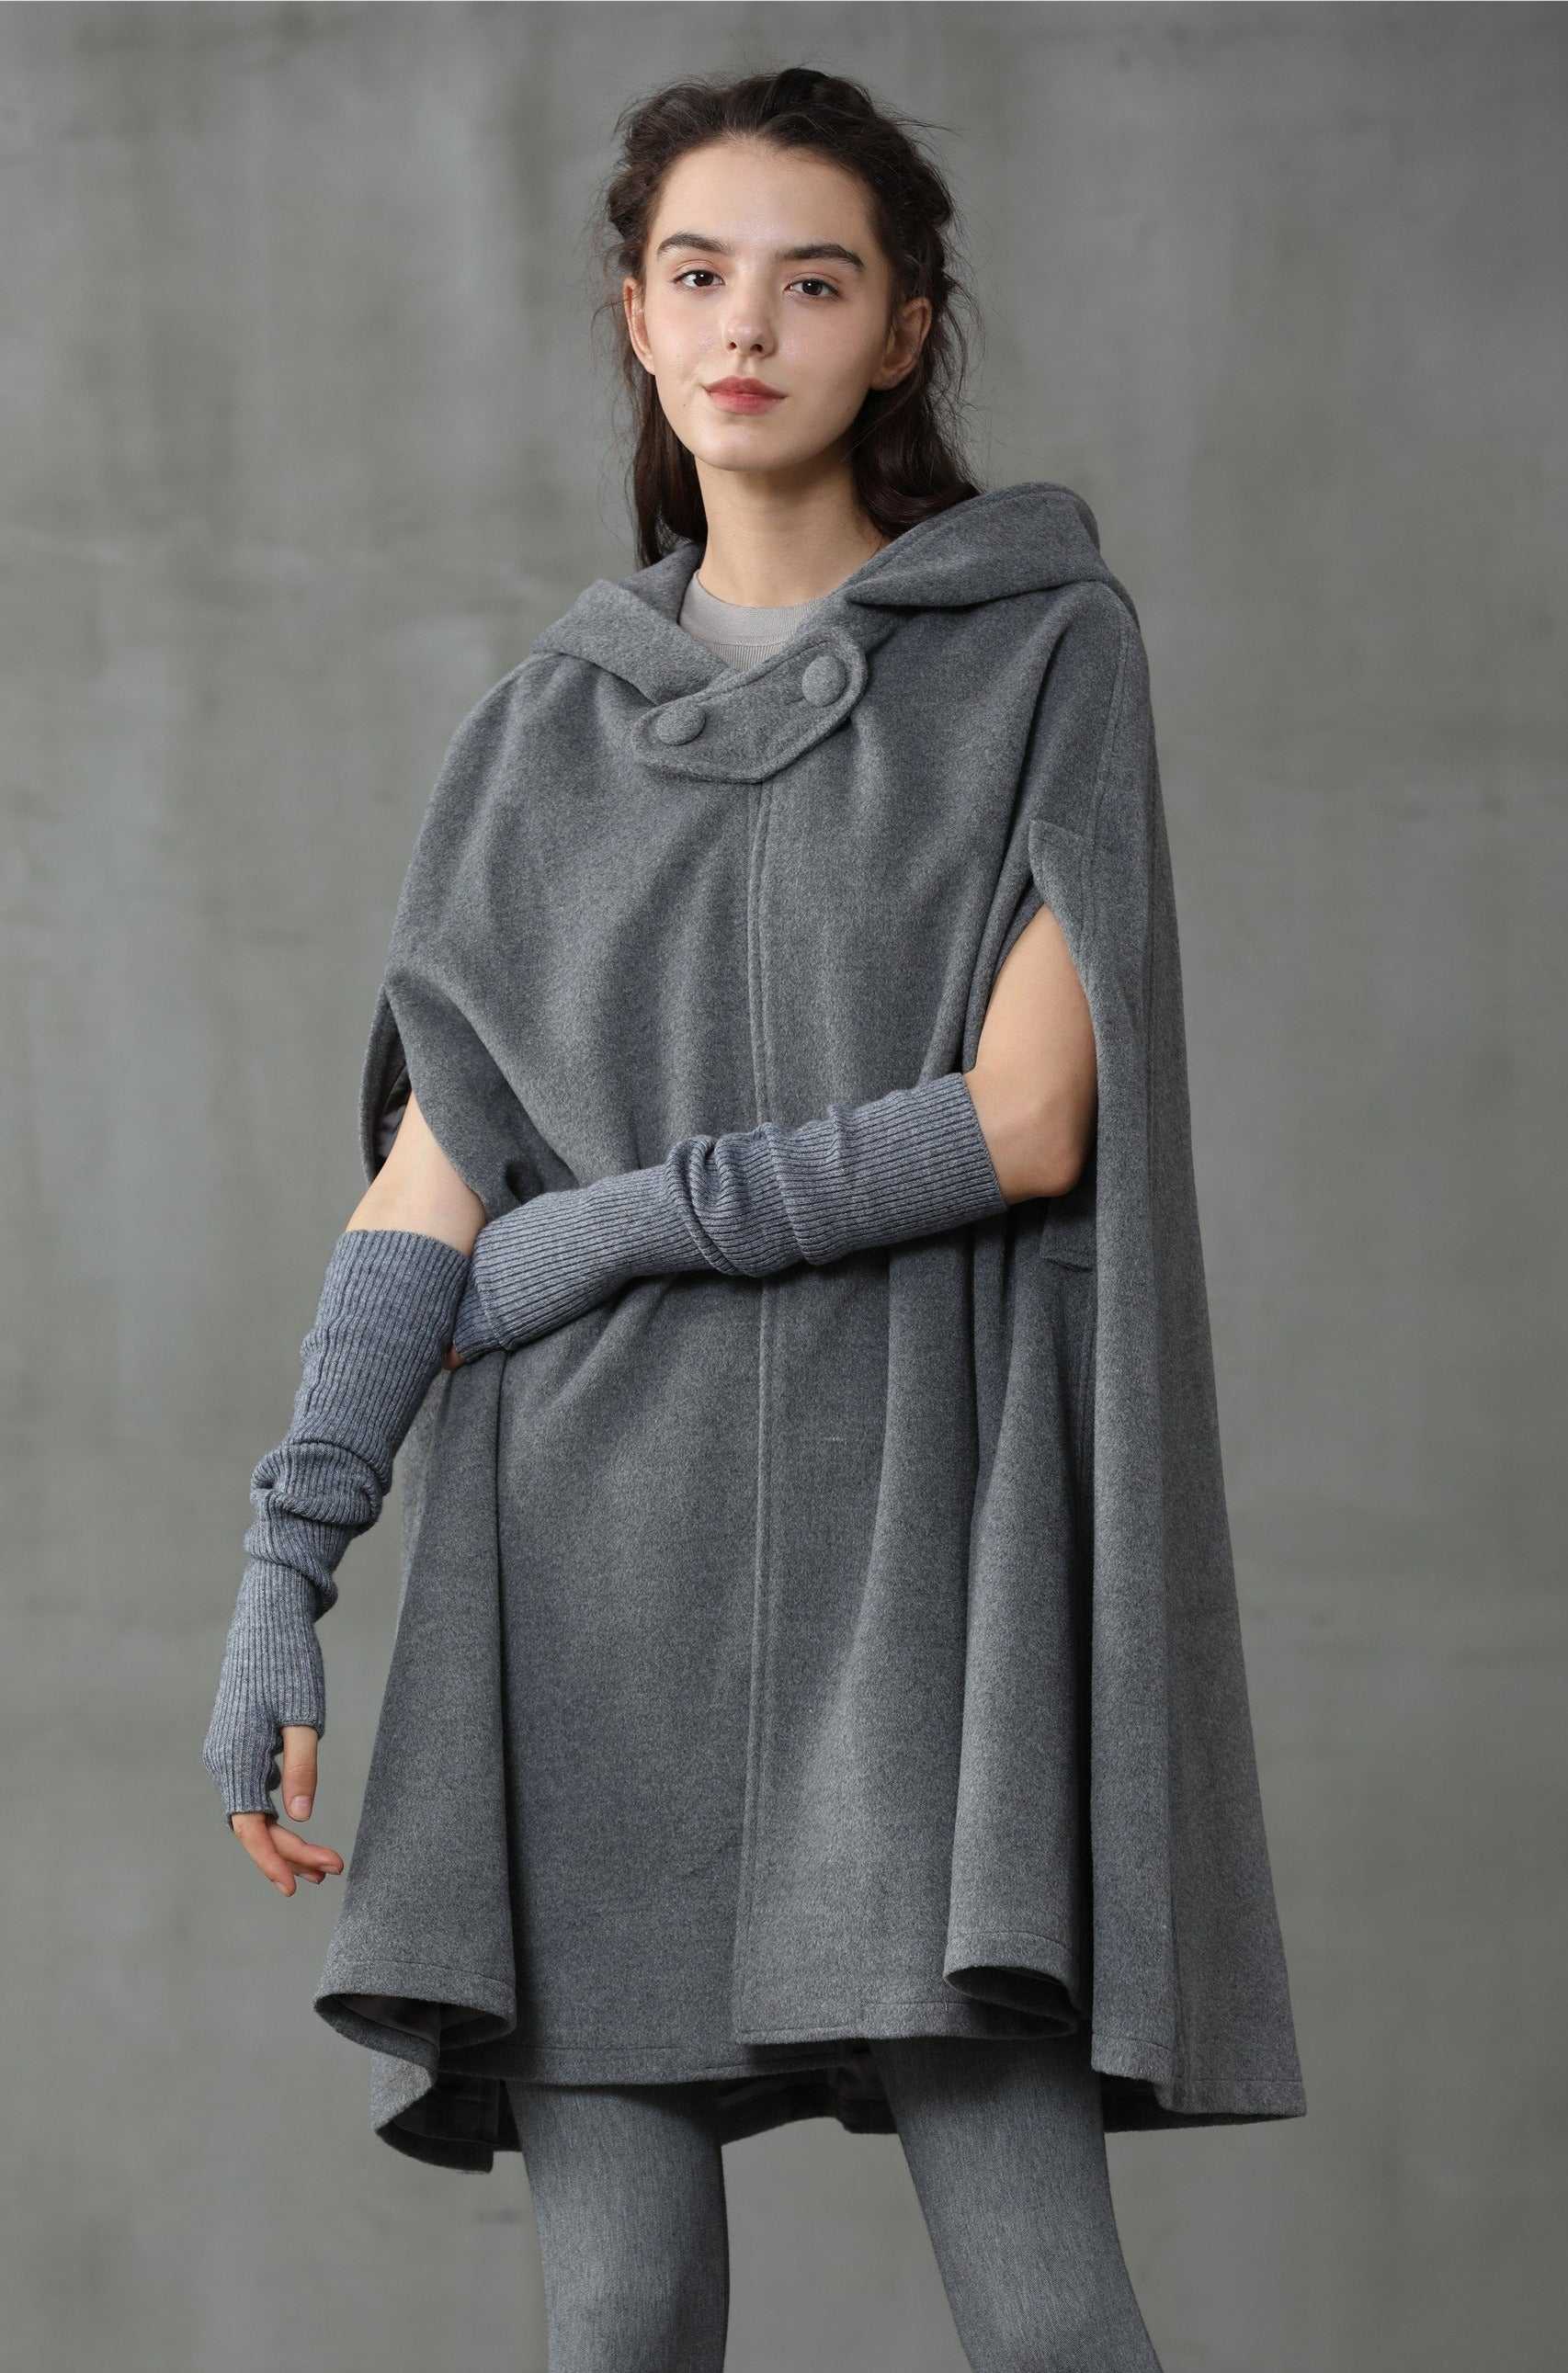 Linennaive, The New Yorker | Hooded Cashmere Cape